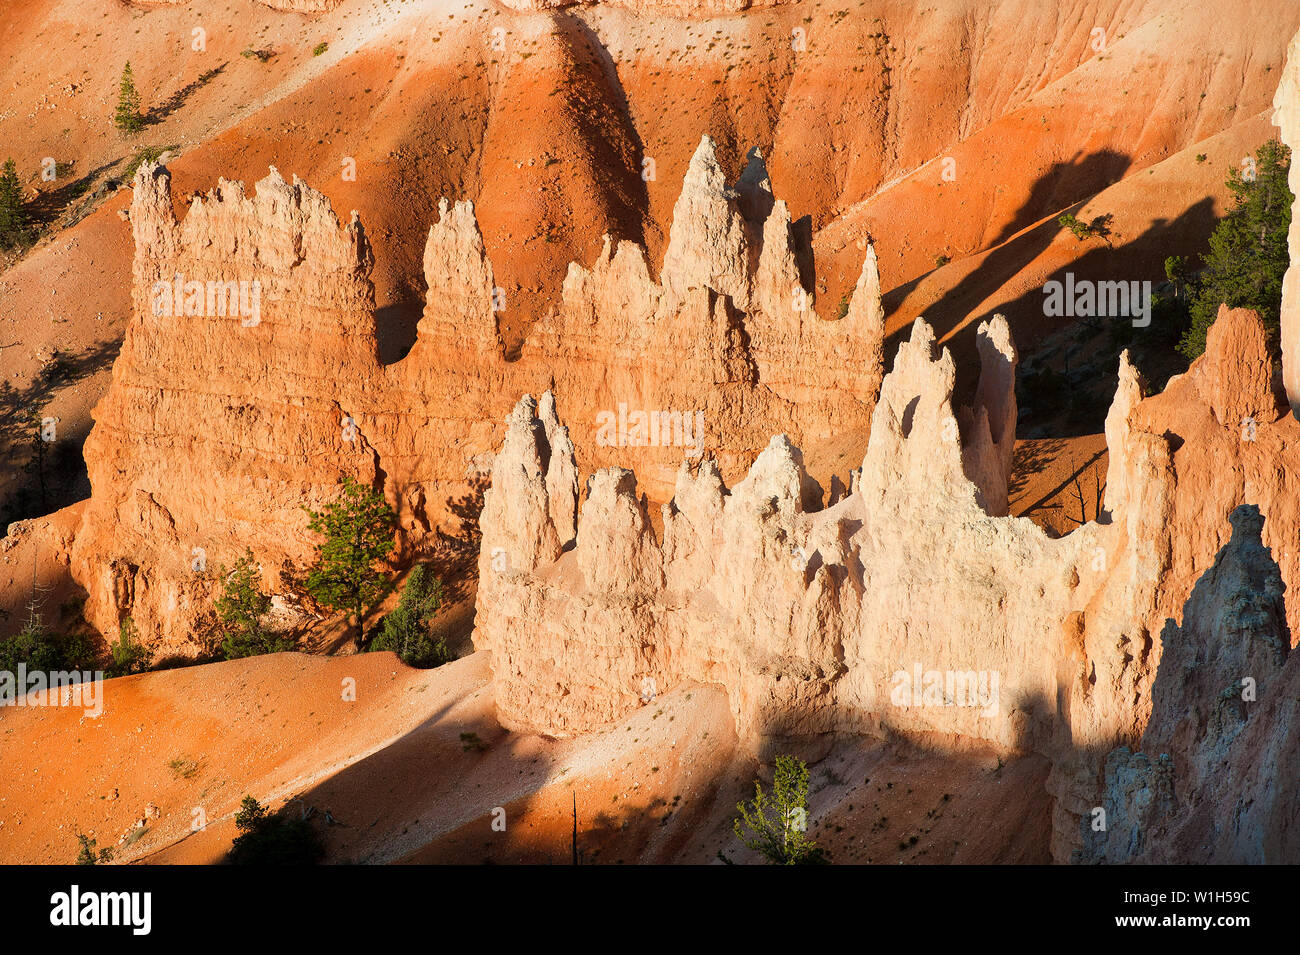 Redrock spires jut out of a moonscape like ampitheater as the first rays of daylight hit Bryce Canyon National Park. (c) 2012 Tom Kelly Stock Photo